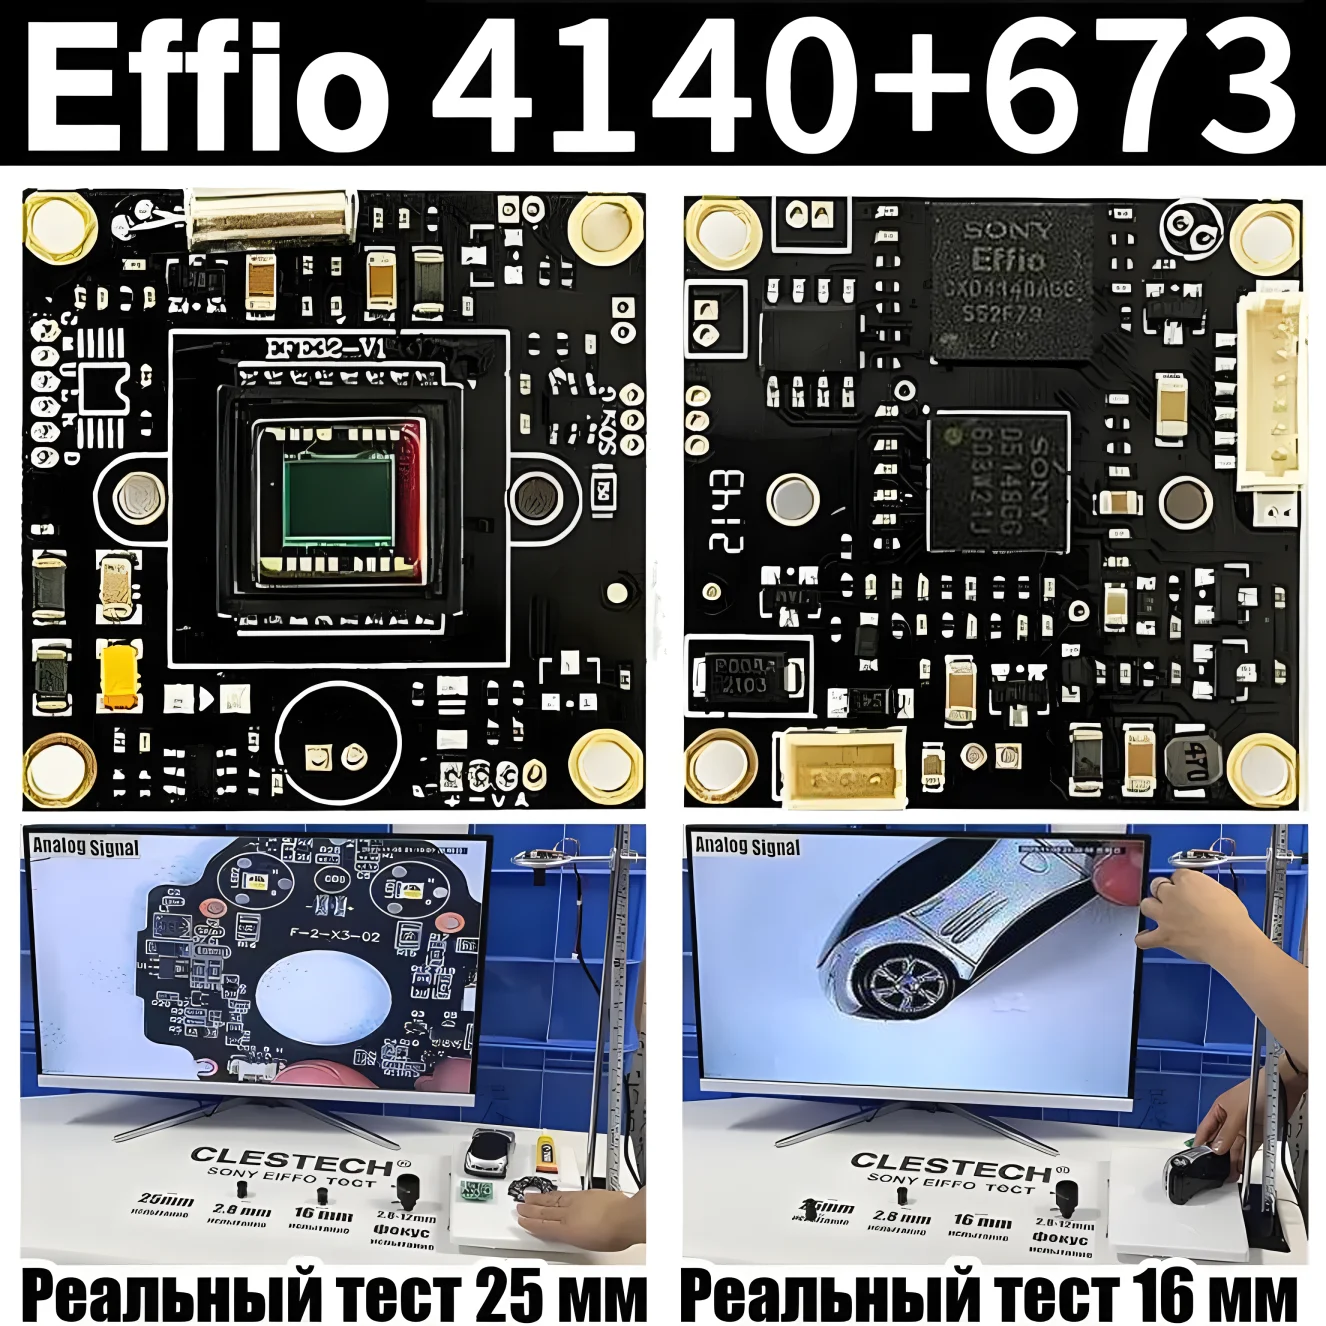 CLESTECH Camera Module Sony Effio CCD 4140+673 800TVL Chip Circuit Board HD CCTV Analog 960H OSD Cable Microscope DIY Monitoring analog 1 4cmos 1200tvl hd color mini cctv camera chip module set finished circuit board 3 6mm surveillance complete product 960h